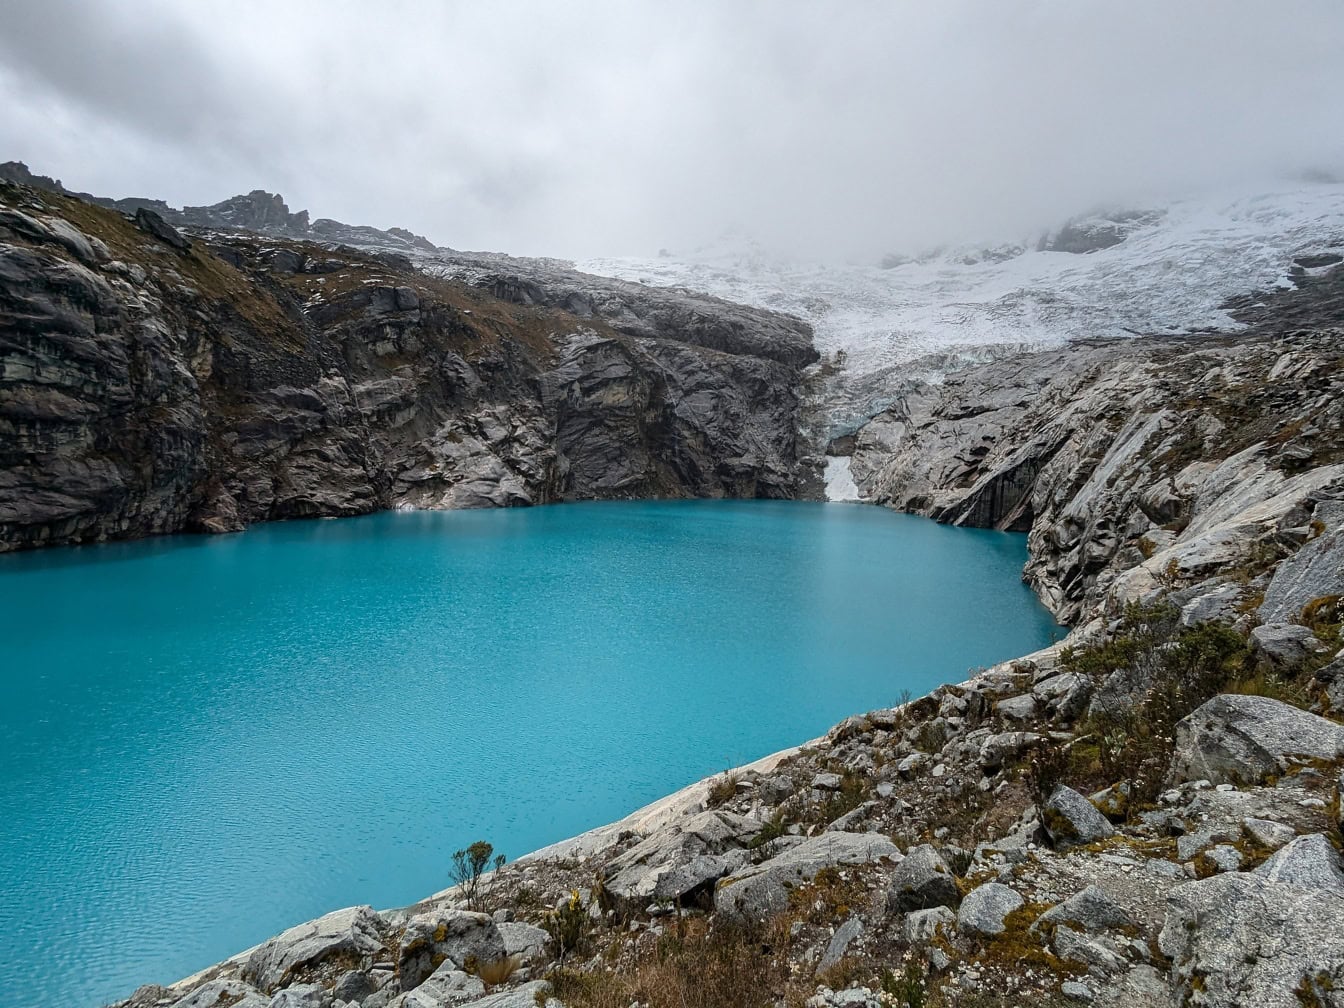 Turquoise blue color of the lake 513 at the foot of Nevado Hualcan mountain in the Huascaran national park in Peru